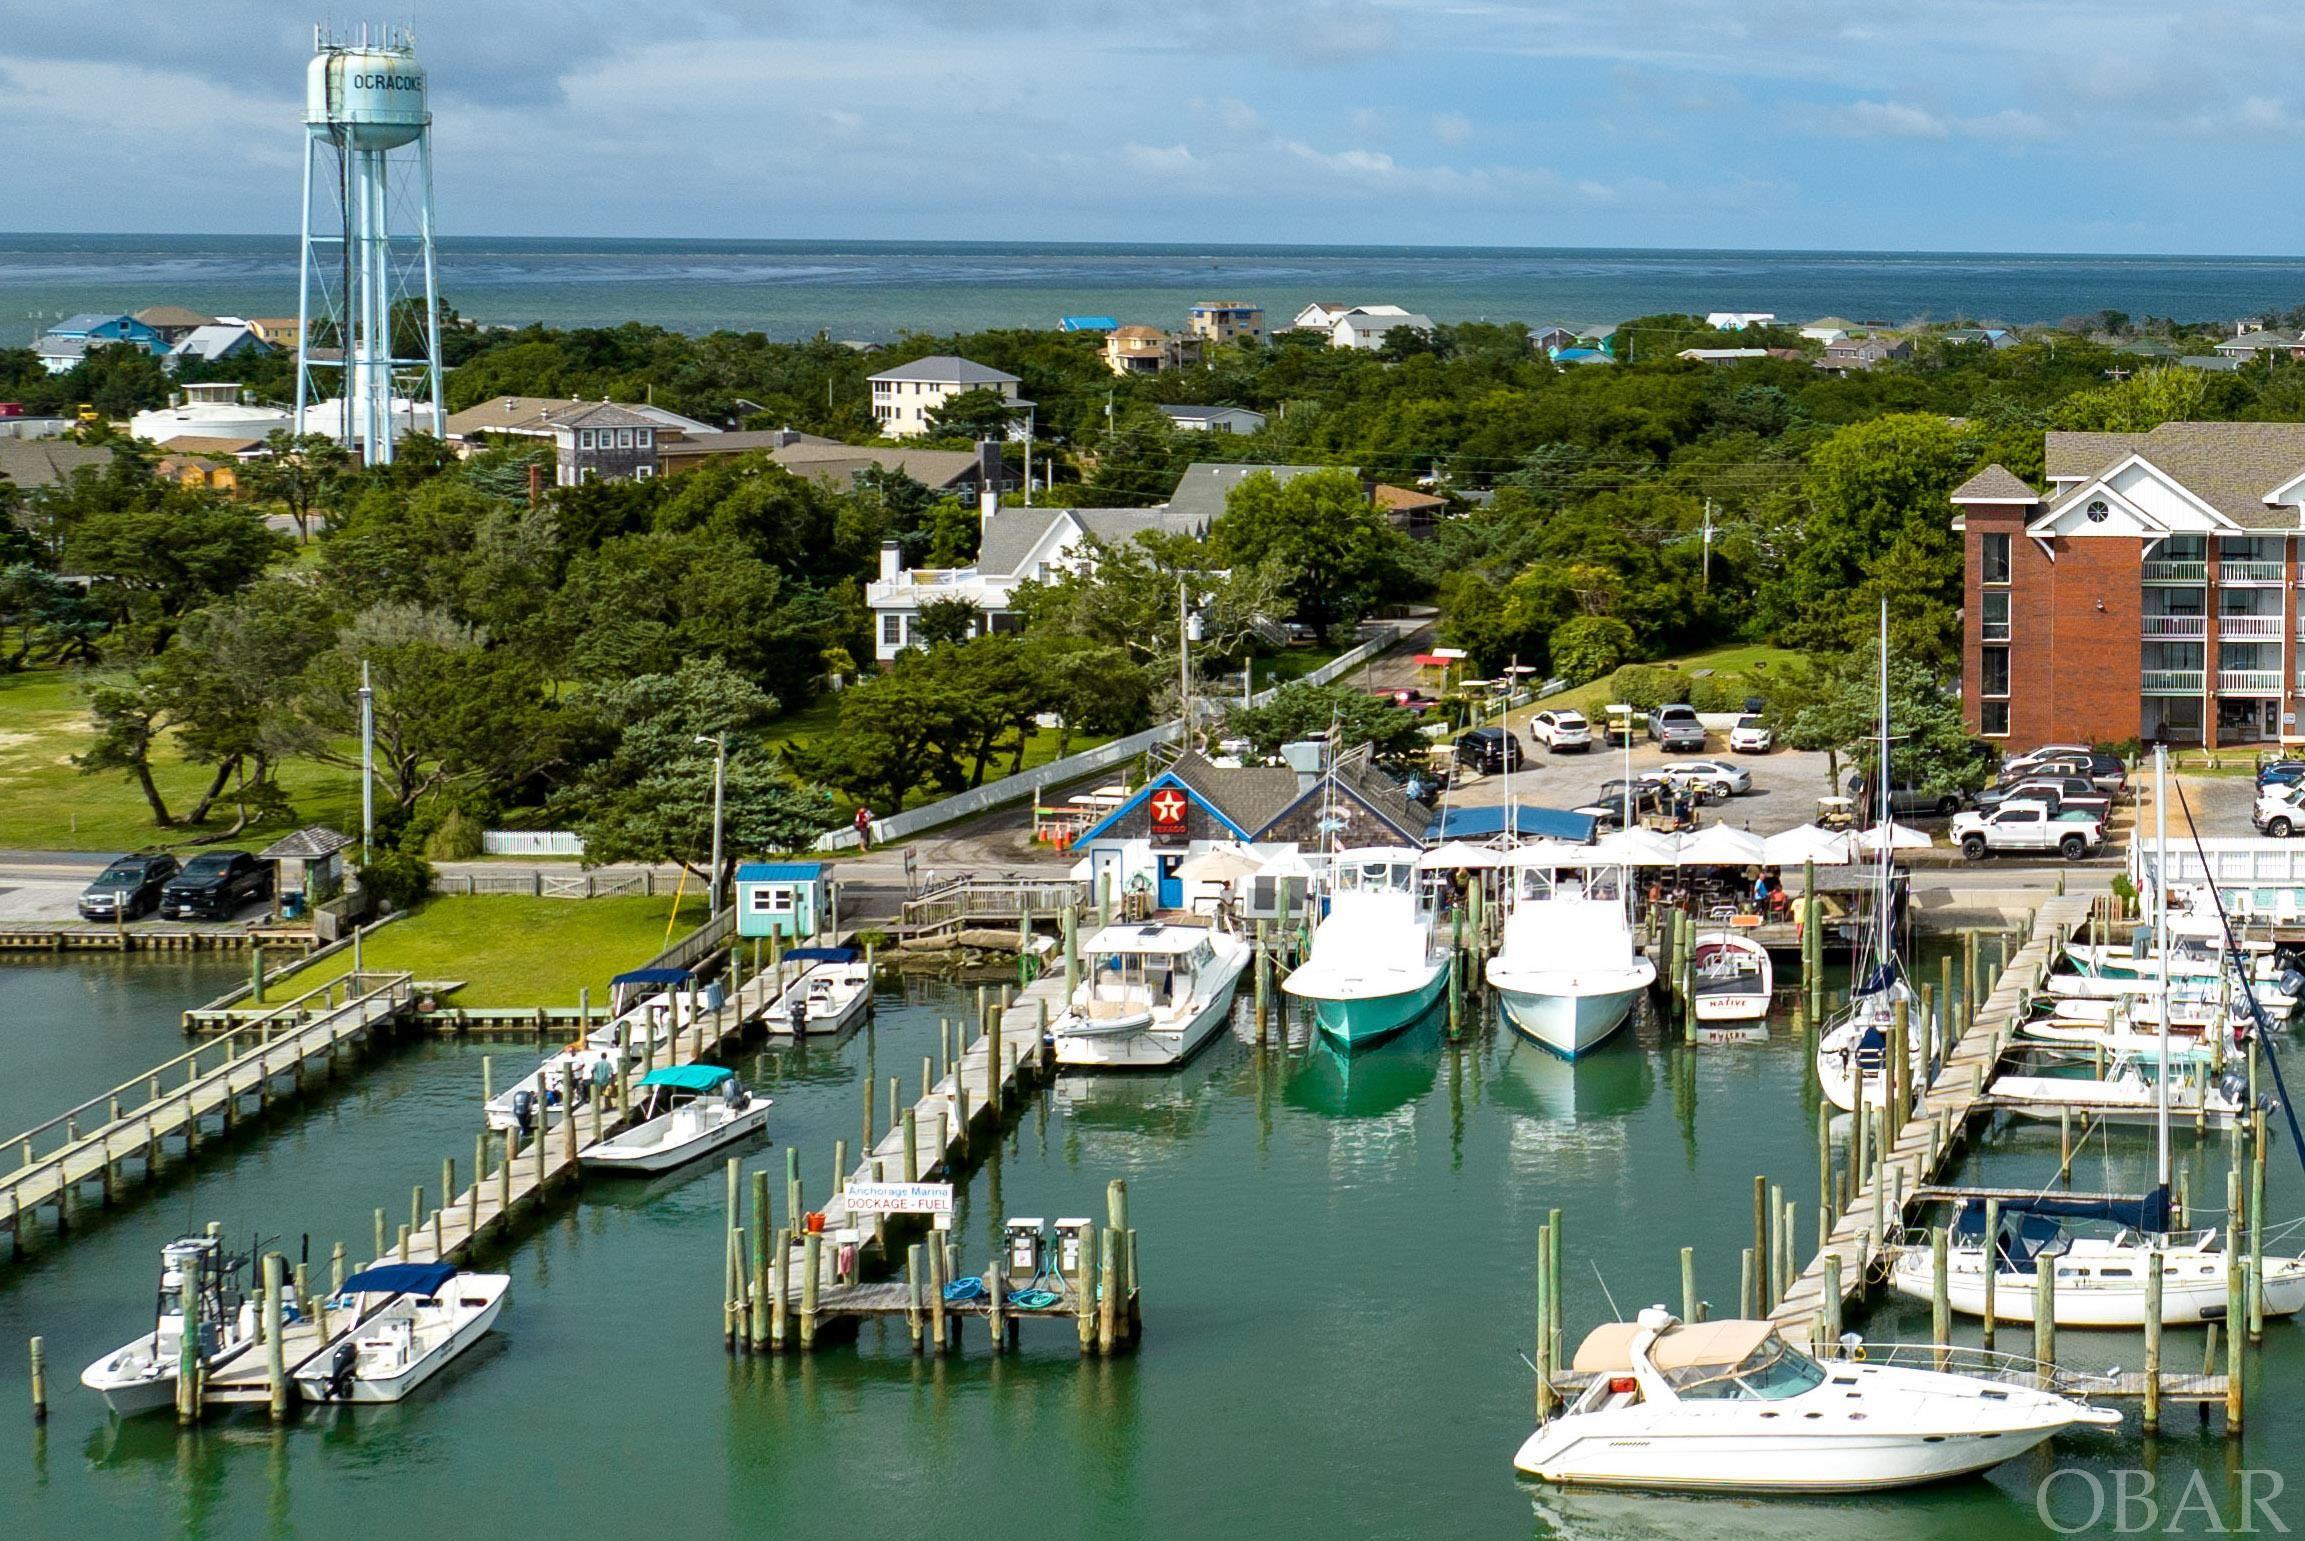 The only fuel service marina in Ocracoke is an international destination for transient vessels sailing the East Coast and ICW. 21 boat slips across 3 piers. Diesel and gasoline service center for dockside fueling. Power and water supply for overnight transient dockage. Marina is regularly fully booked throughout the season and there is a lengthy waiting list for long term slip leases. 150'+/- of prime harbor frontage right on Hwy 12. The Anchorage Marina and SmacNally's dockside bar and grill are the first commercial sitings off of the southern vehicle and passenger ferry. SmacNally's bar and grill, current restaurant lessee at the marina, is the only waterside dining on the island. Multiple slips occupied by local charter fishing boats, a large afternoon attraction. Turnkey opportunity for an owner/operator or investor wishing to own a long standing and successful island business. Package deal available for combined purchase of Ocracoke Marina and Anchorage Inn. Anchorage Inn must sell before marina can be sold individually. Contact your agent today for more details.